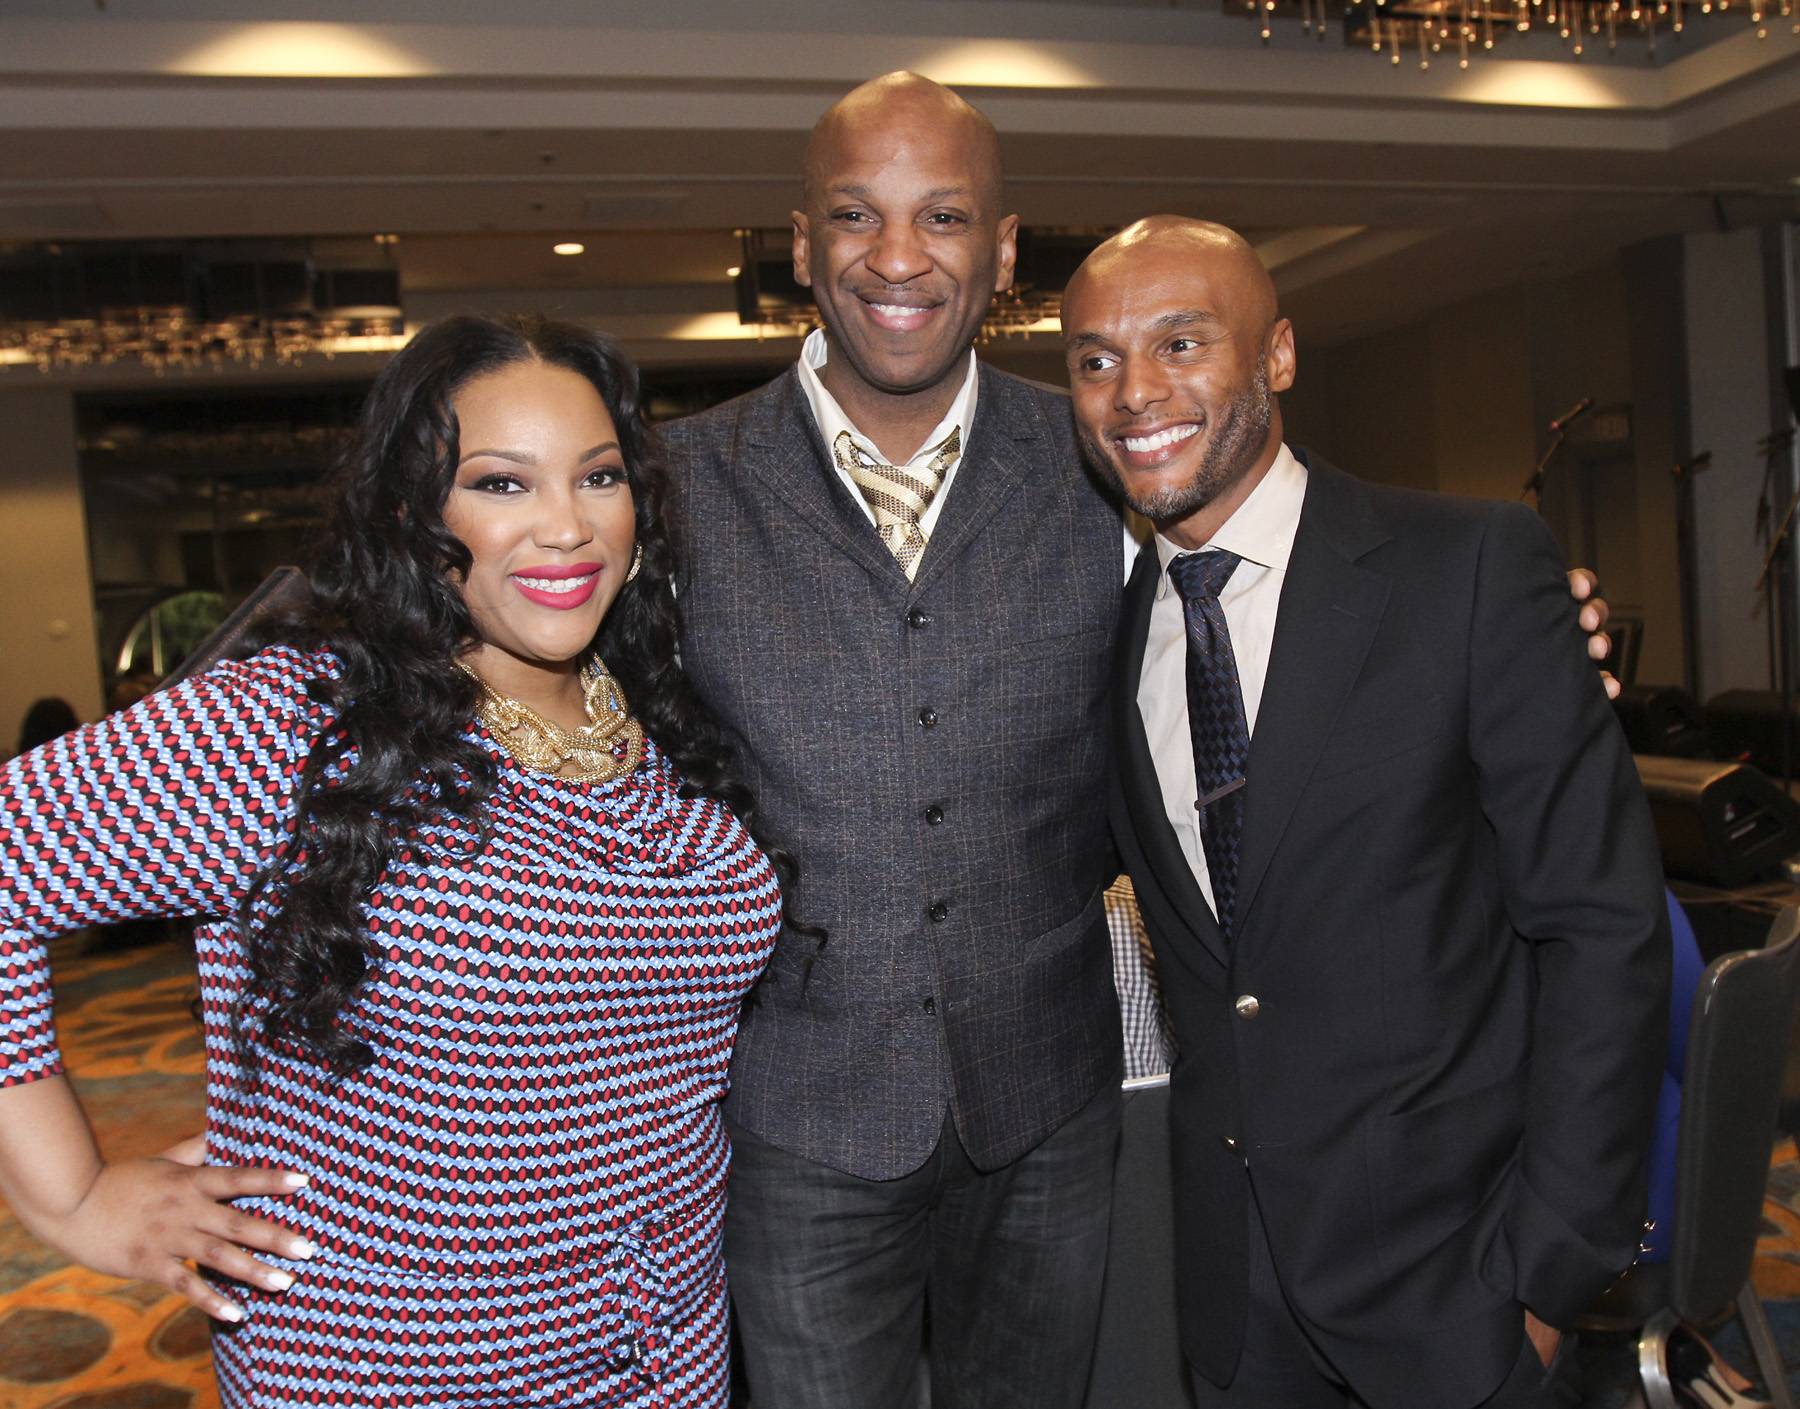 Hug It Out - Tasha Page-Lockhart, Donnie McClurkin and Kenny Lattimore bond and celebrate the Lord during the prayer breakfast looking flawless. &nbsp;  (Photo: Maury Phillips/Getty Images for BET)&nbsp;&nbsp;&nbsp;&nbsp;&nbsp;&nbsp;&nbsp;&nbsp;&nbsp;&nbsp;&nbsp;&nbsp;&nbsp;